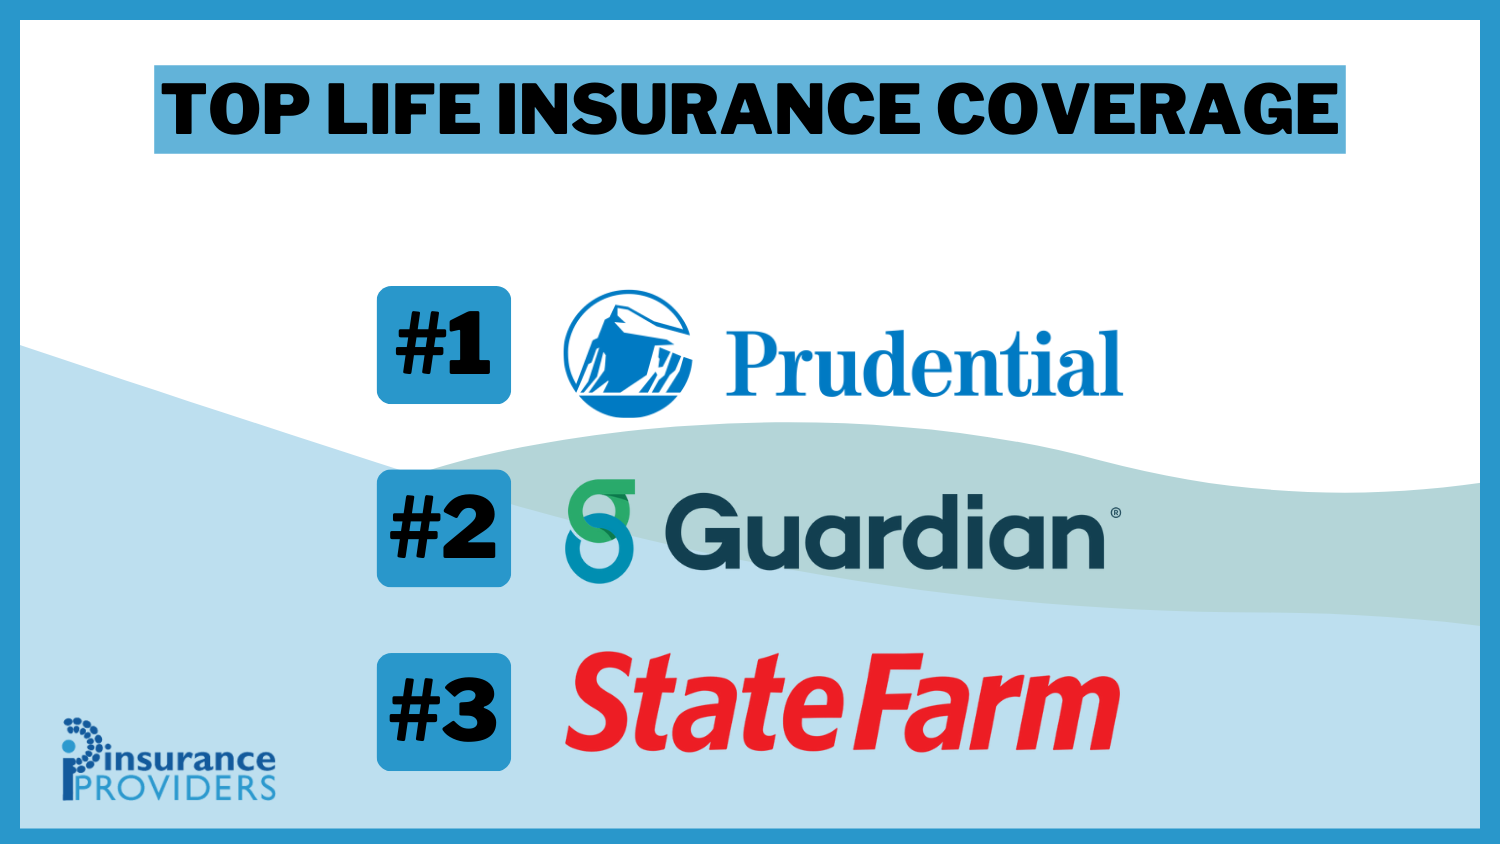 Top Life Insurance Coverage: What You Need to Know: Prudential, Guardian and Statefarm